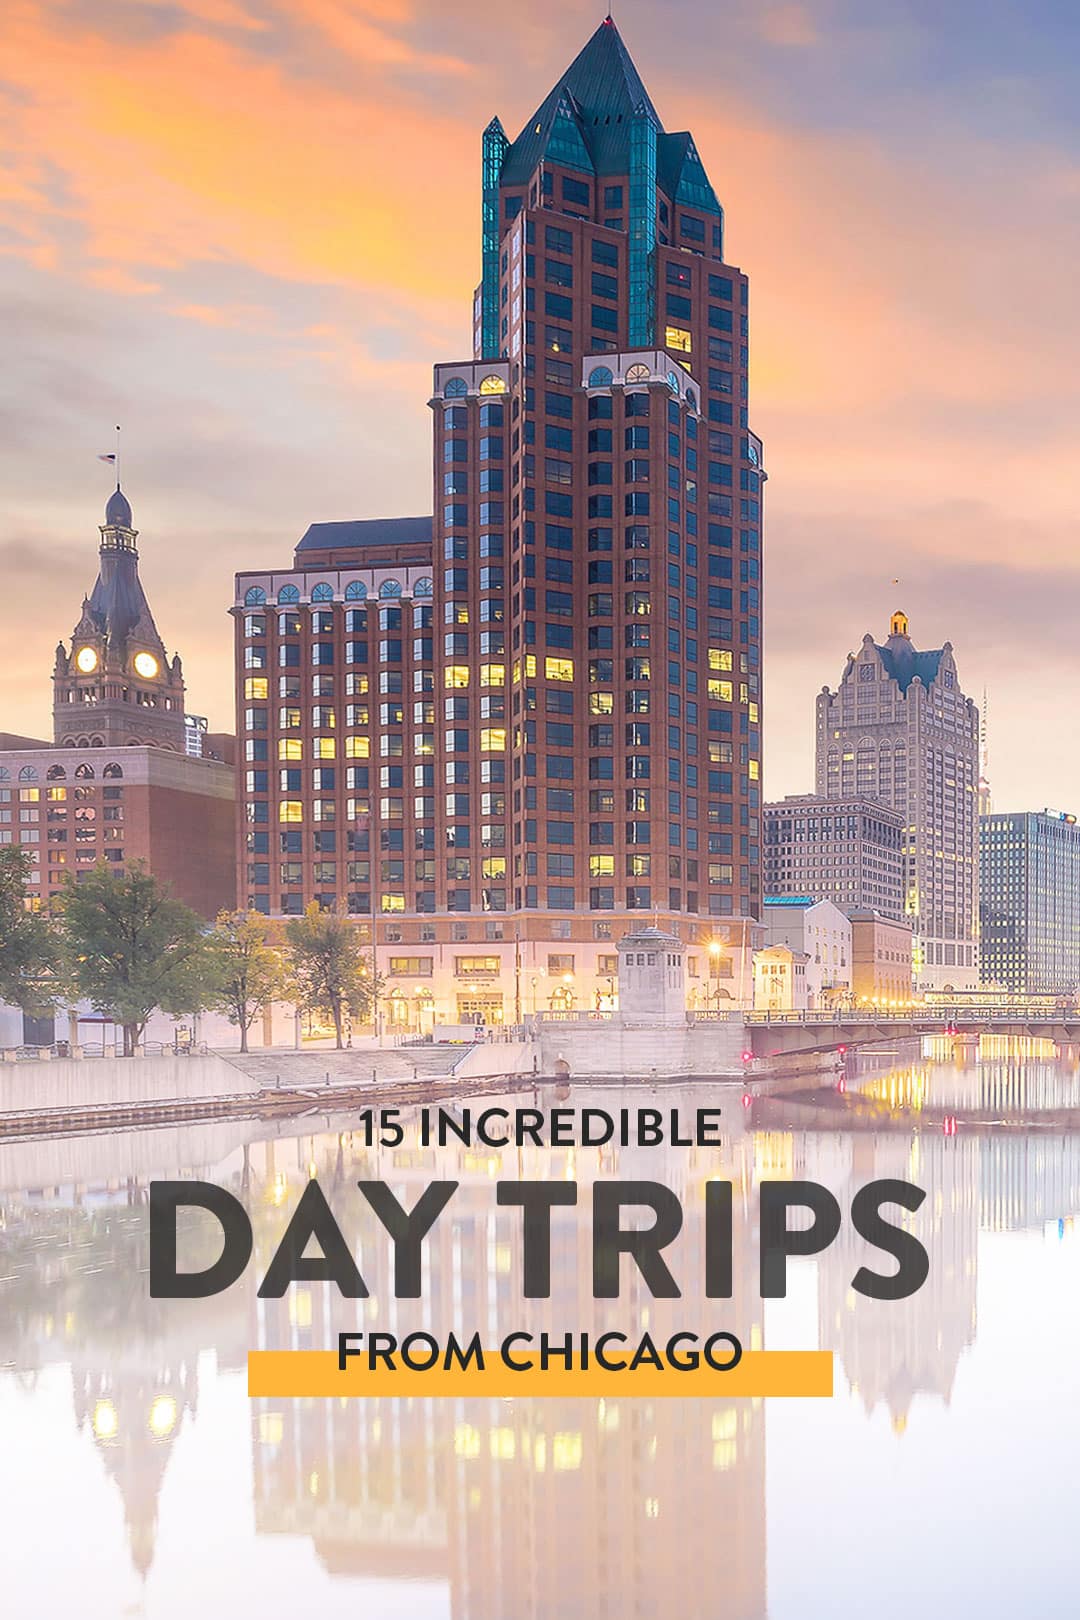 day trips from chicago by train